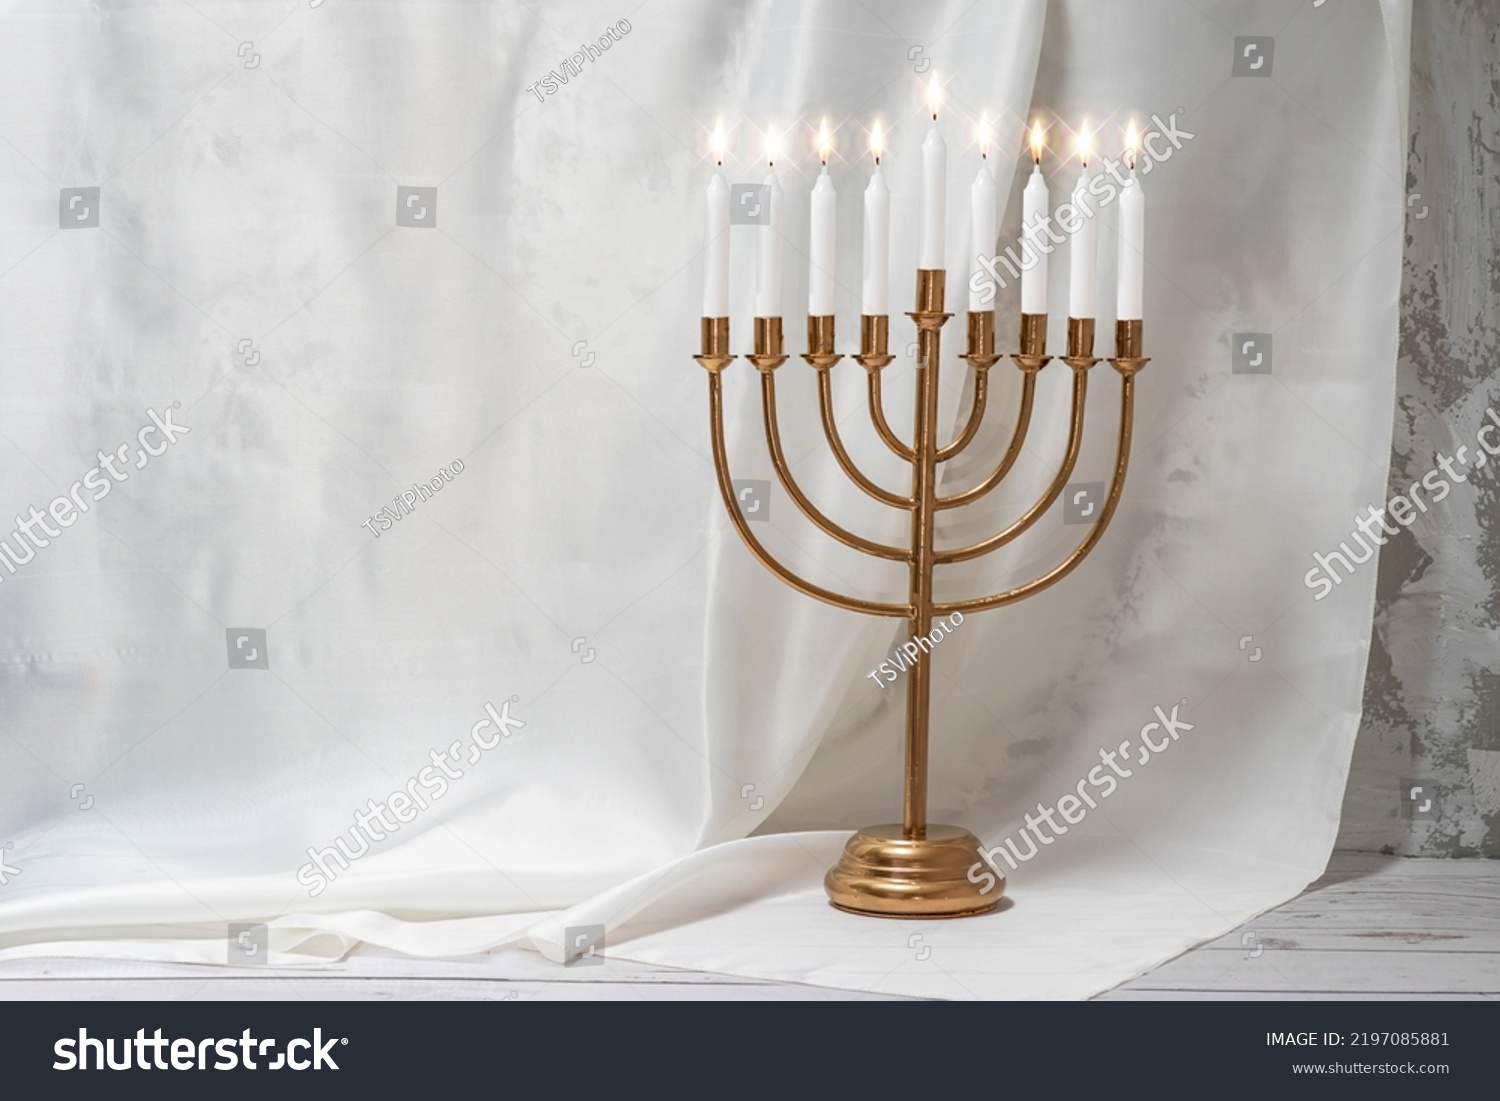 Jewish Hanukkah Menorah 9 Branch Candlestick. Holiday Candle Holder. Nine-arm candlestick. Traditional Hebrew Festival of Lights candelabra. Background for design with copy space. #2197085881